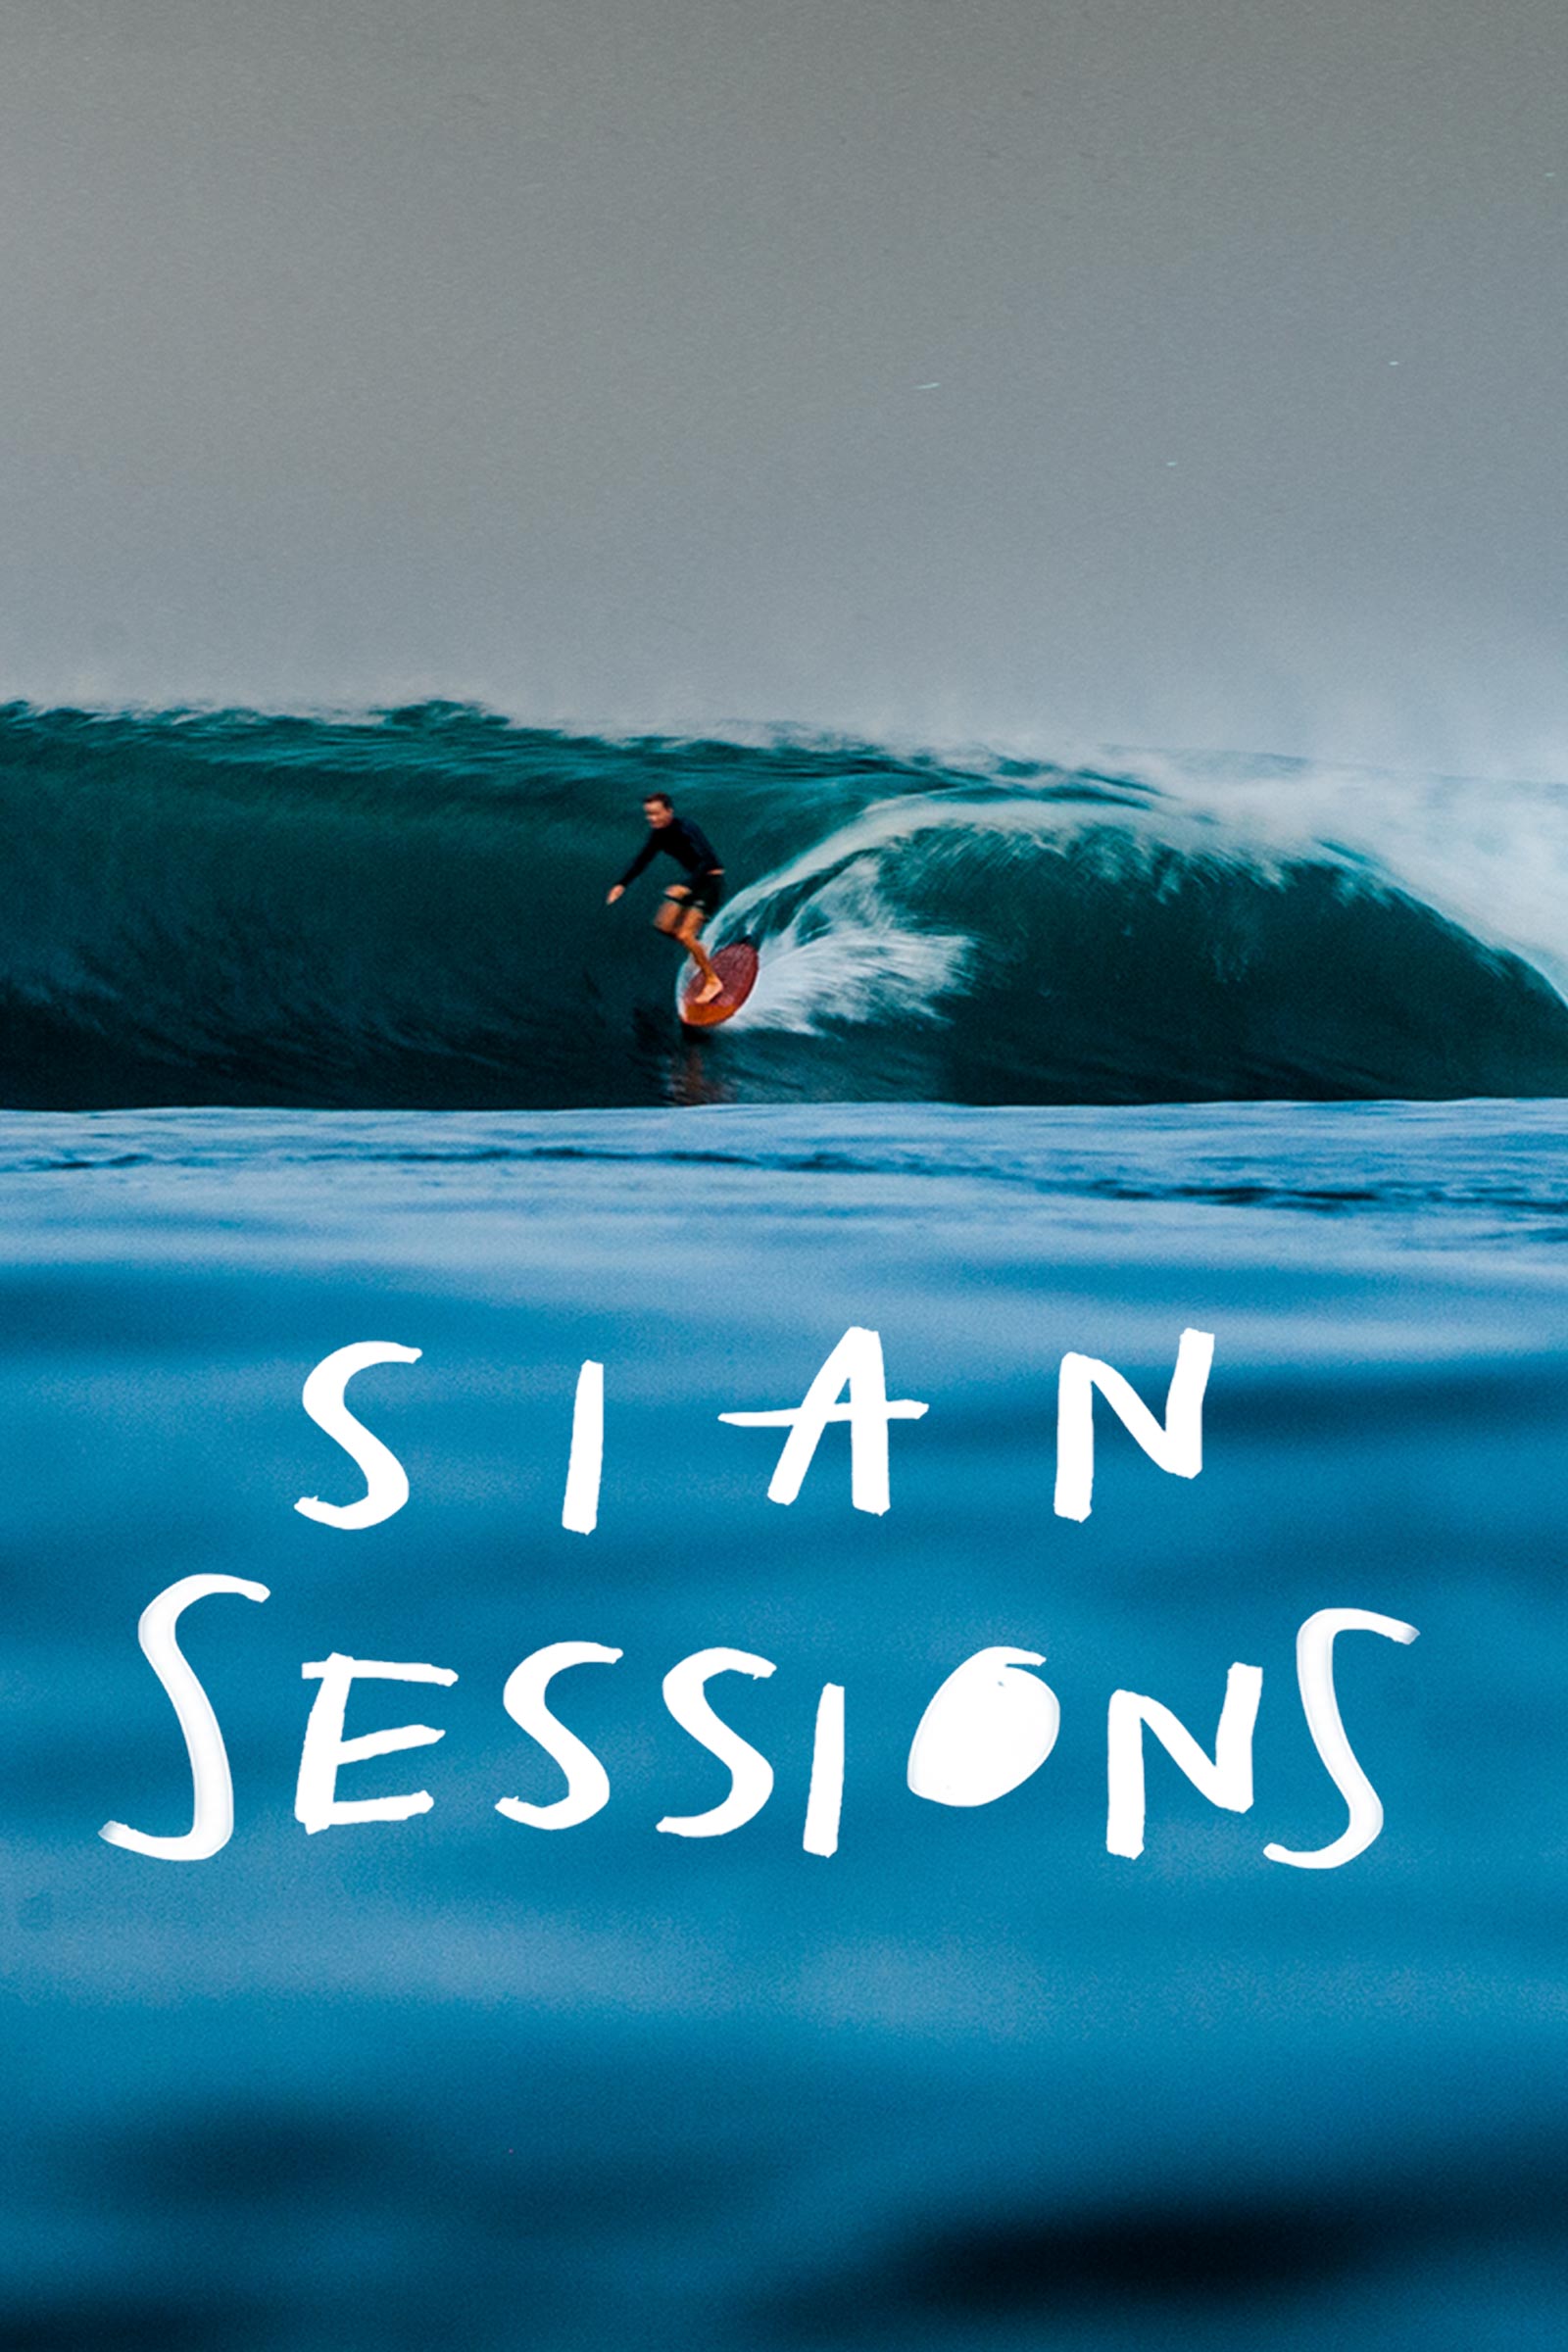 Where to stream Sian Sessions